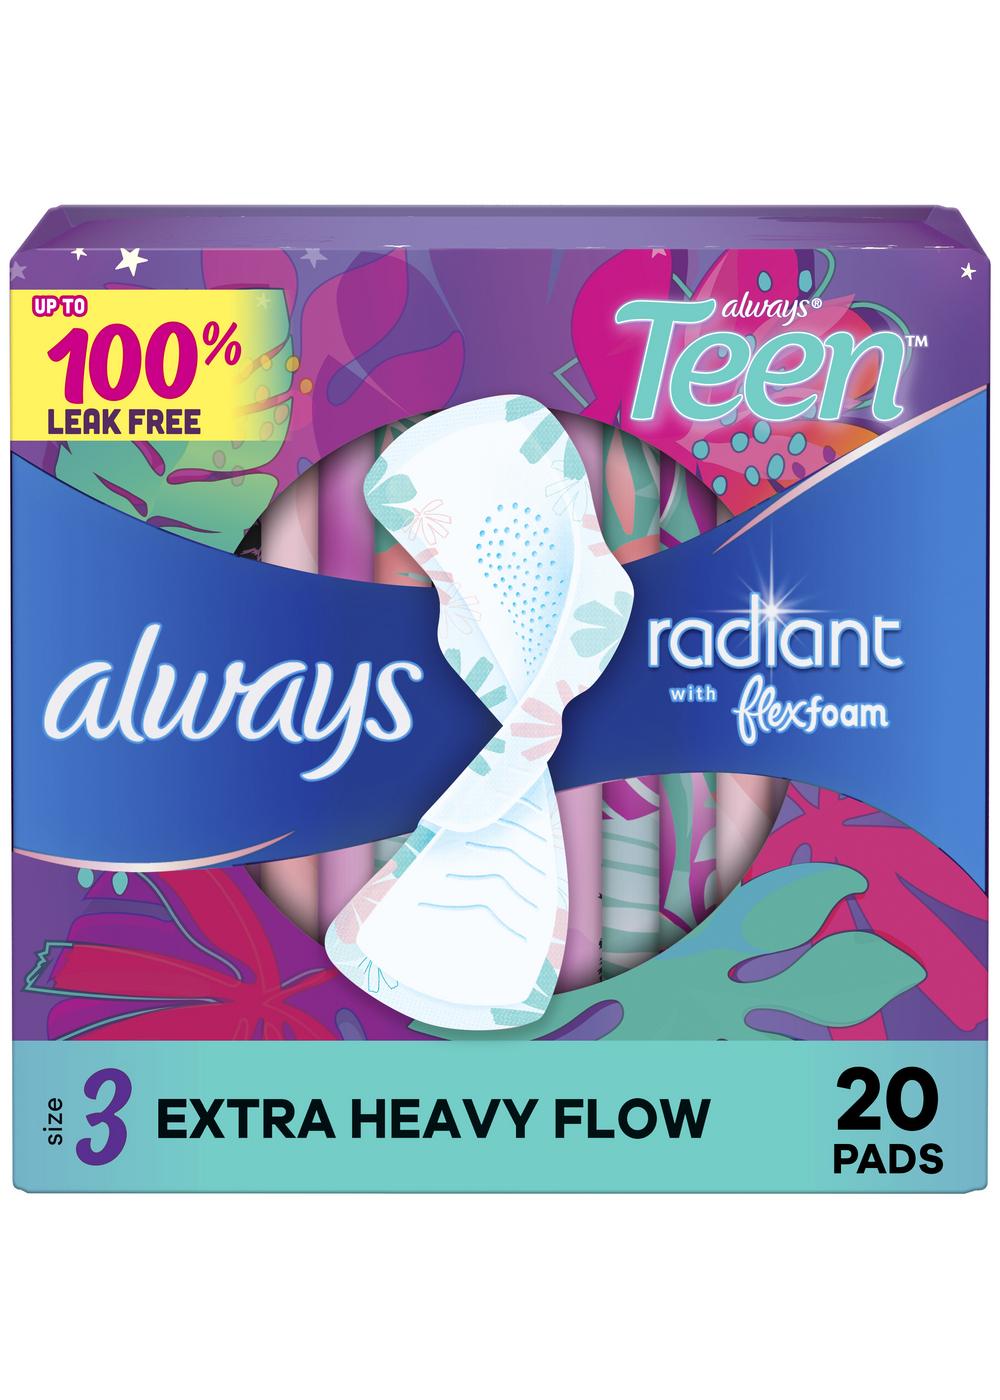 Always Teen Radiant FlexFoam Pads Size 3 Extra Heavy with Wings; image 1 of 5